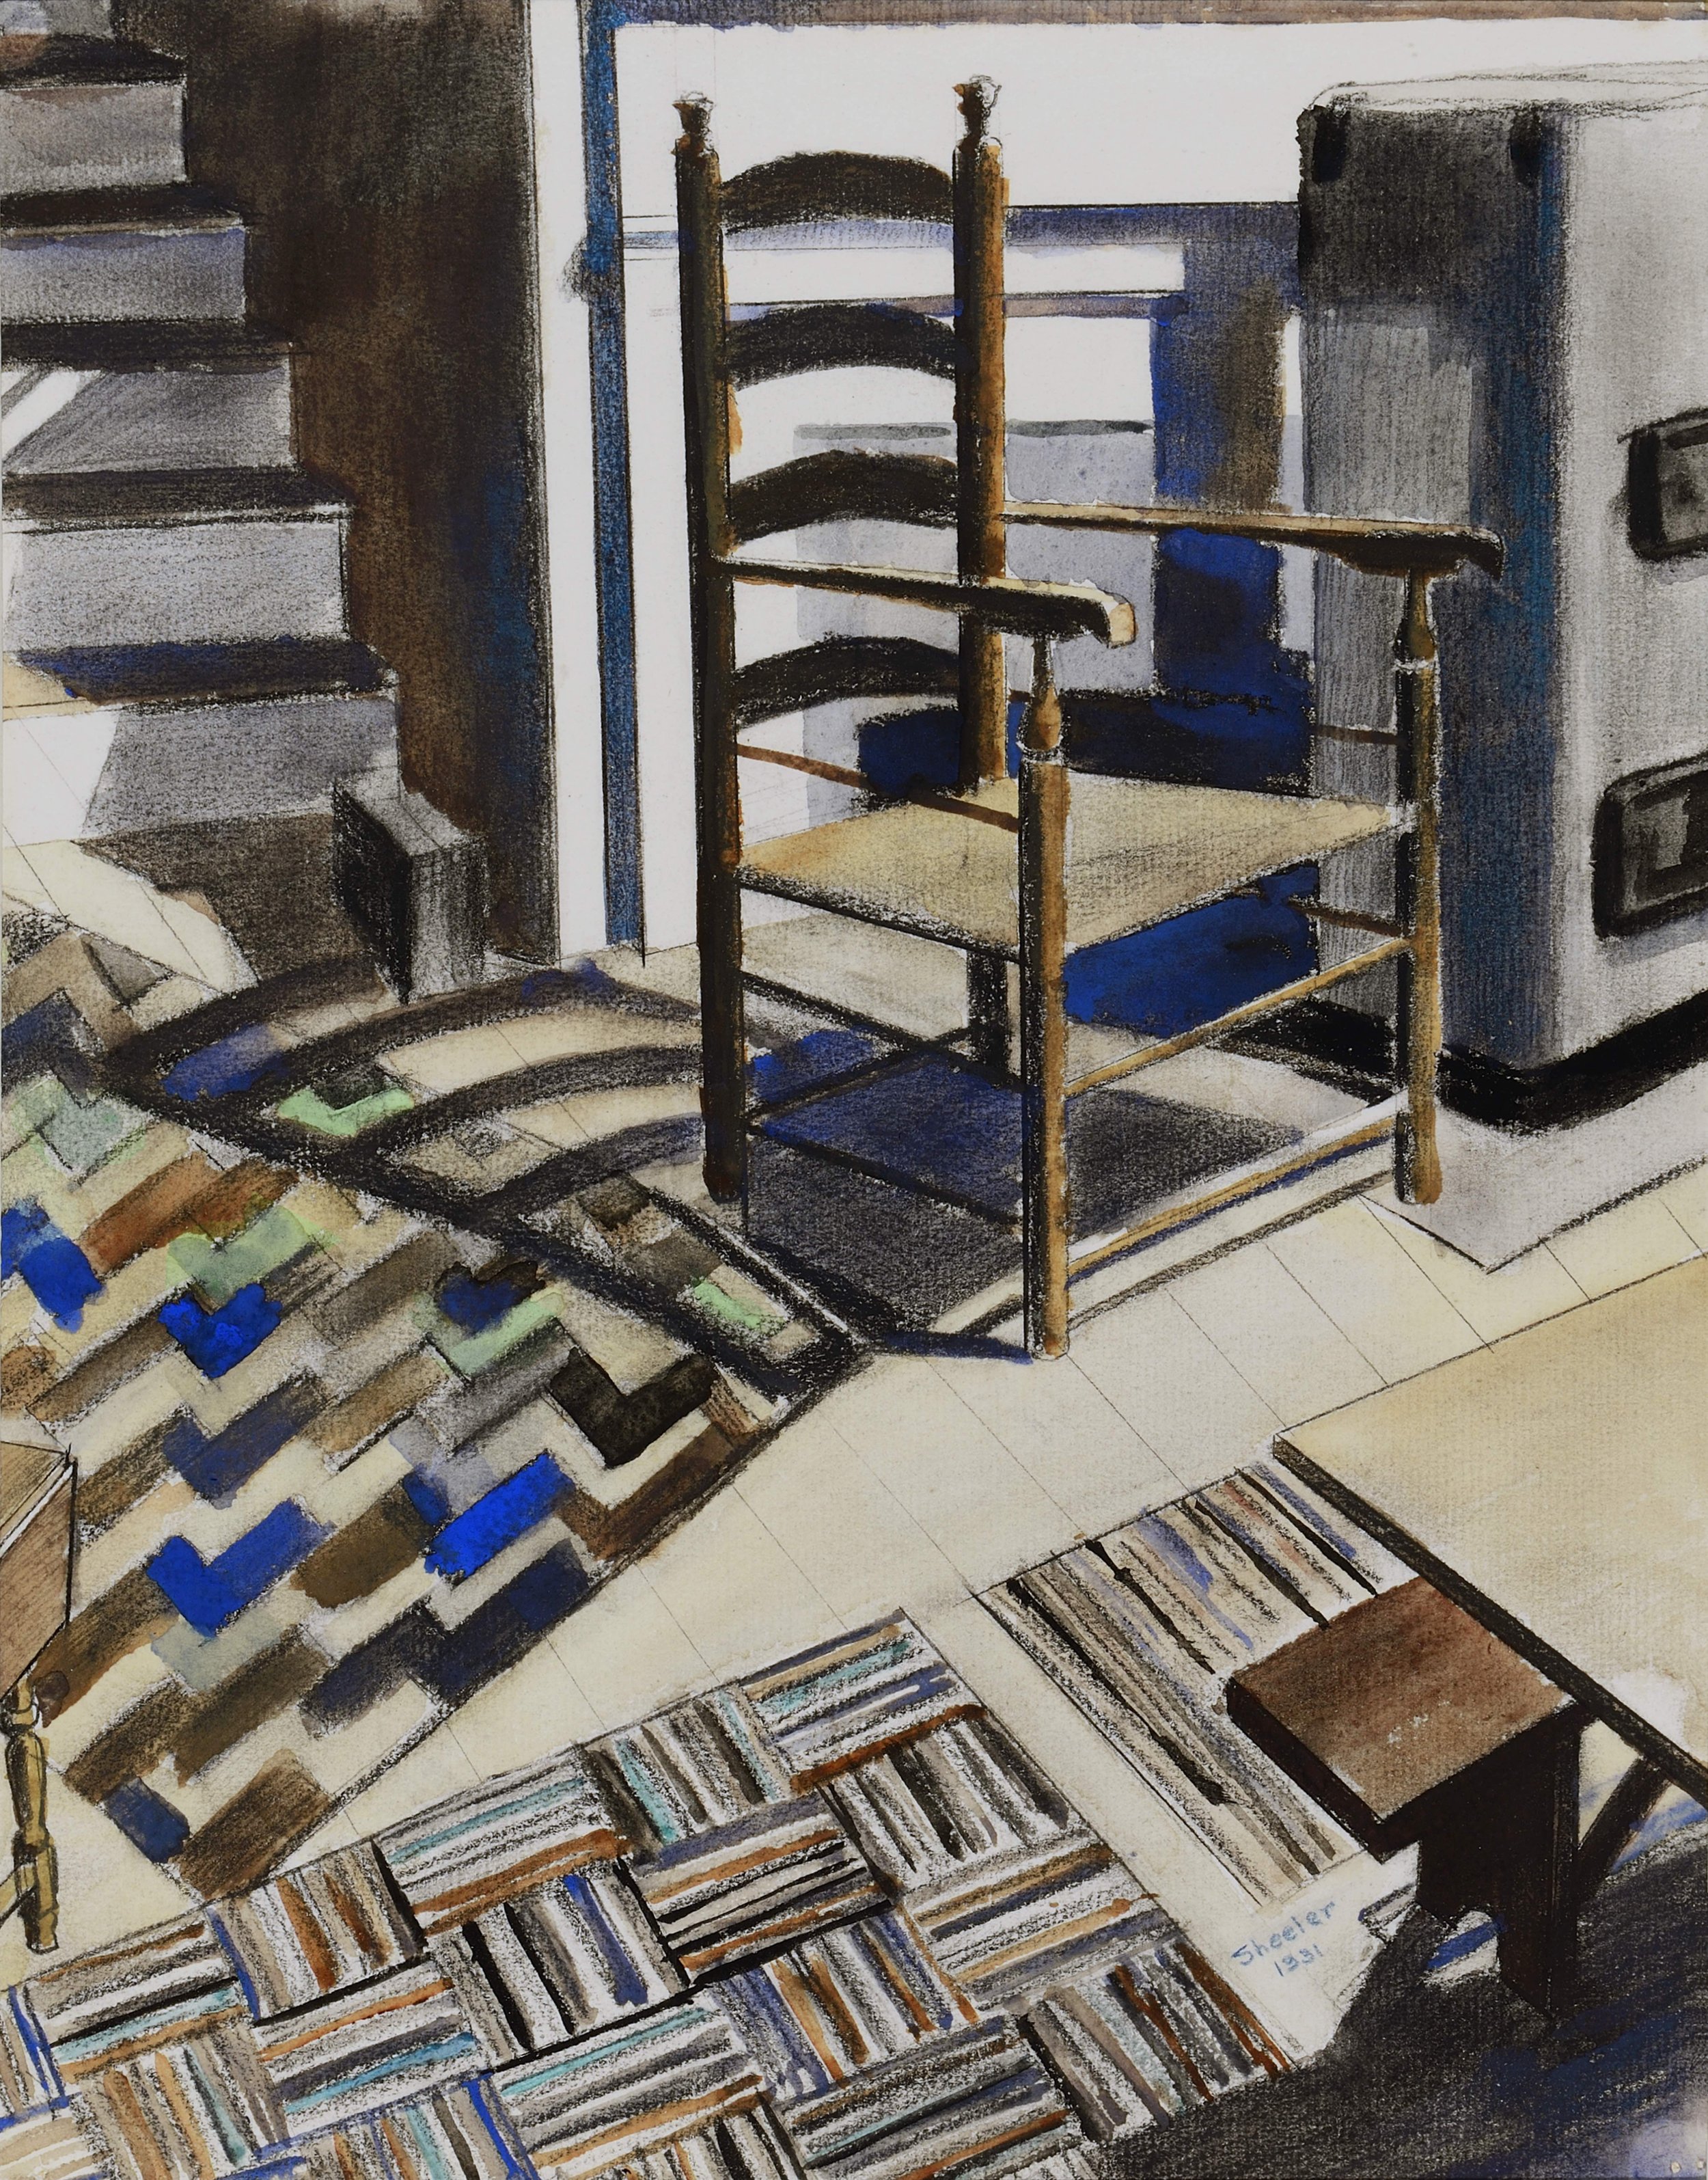 Halpert &amp; Sheeler (2) &lt;alt: Interior of a home with a Shaker chair and patterned rugs in blue, brown, grey, and green &lt;/&gt;